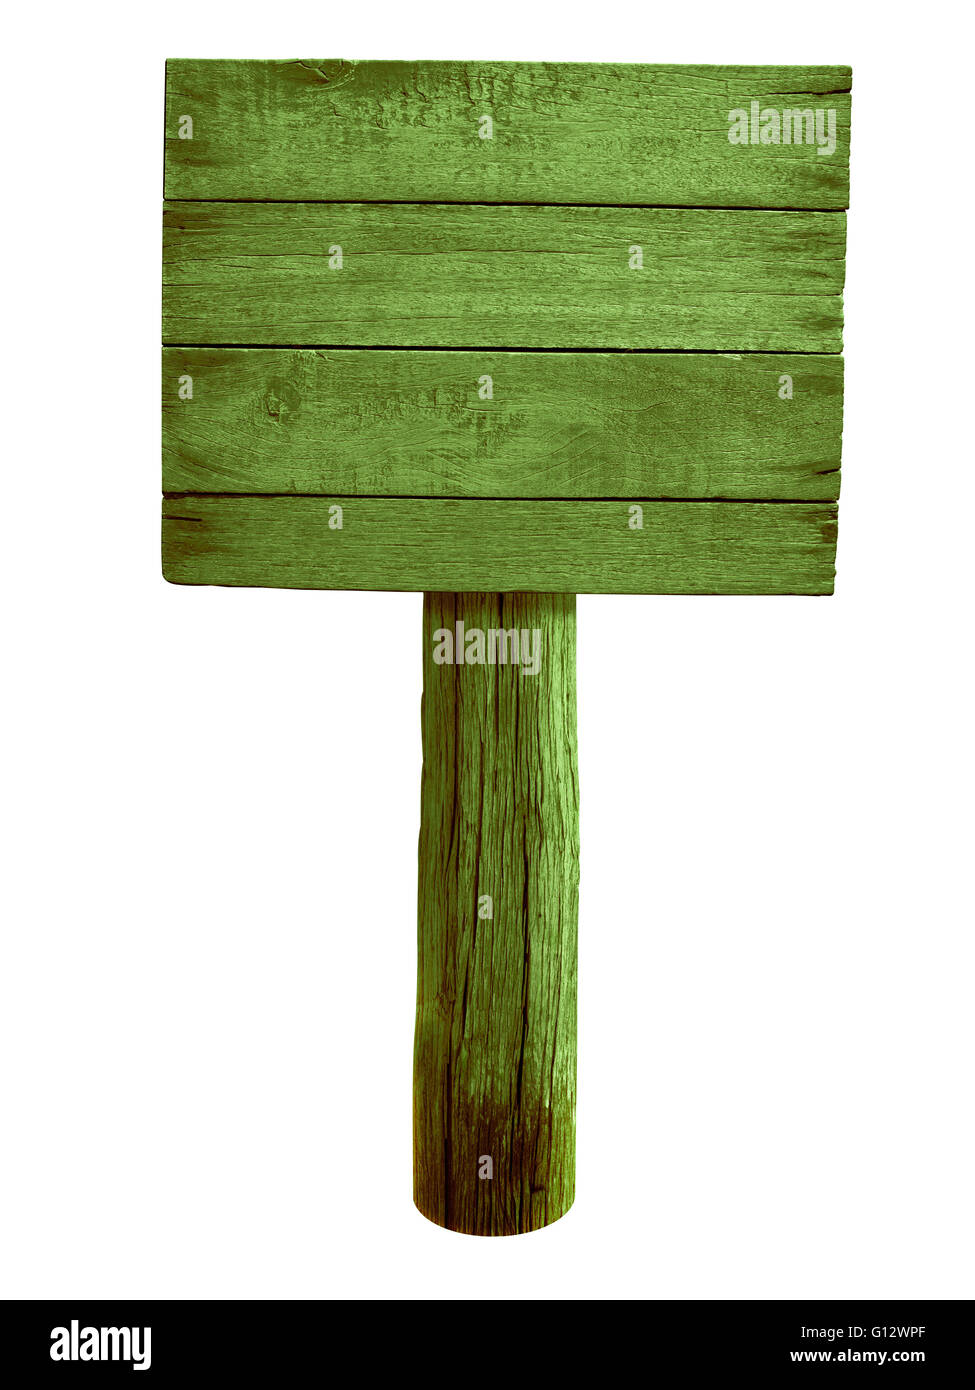 Le bois vert road sign isolated on white Banque D'Images